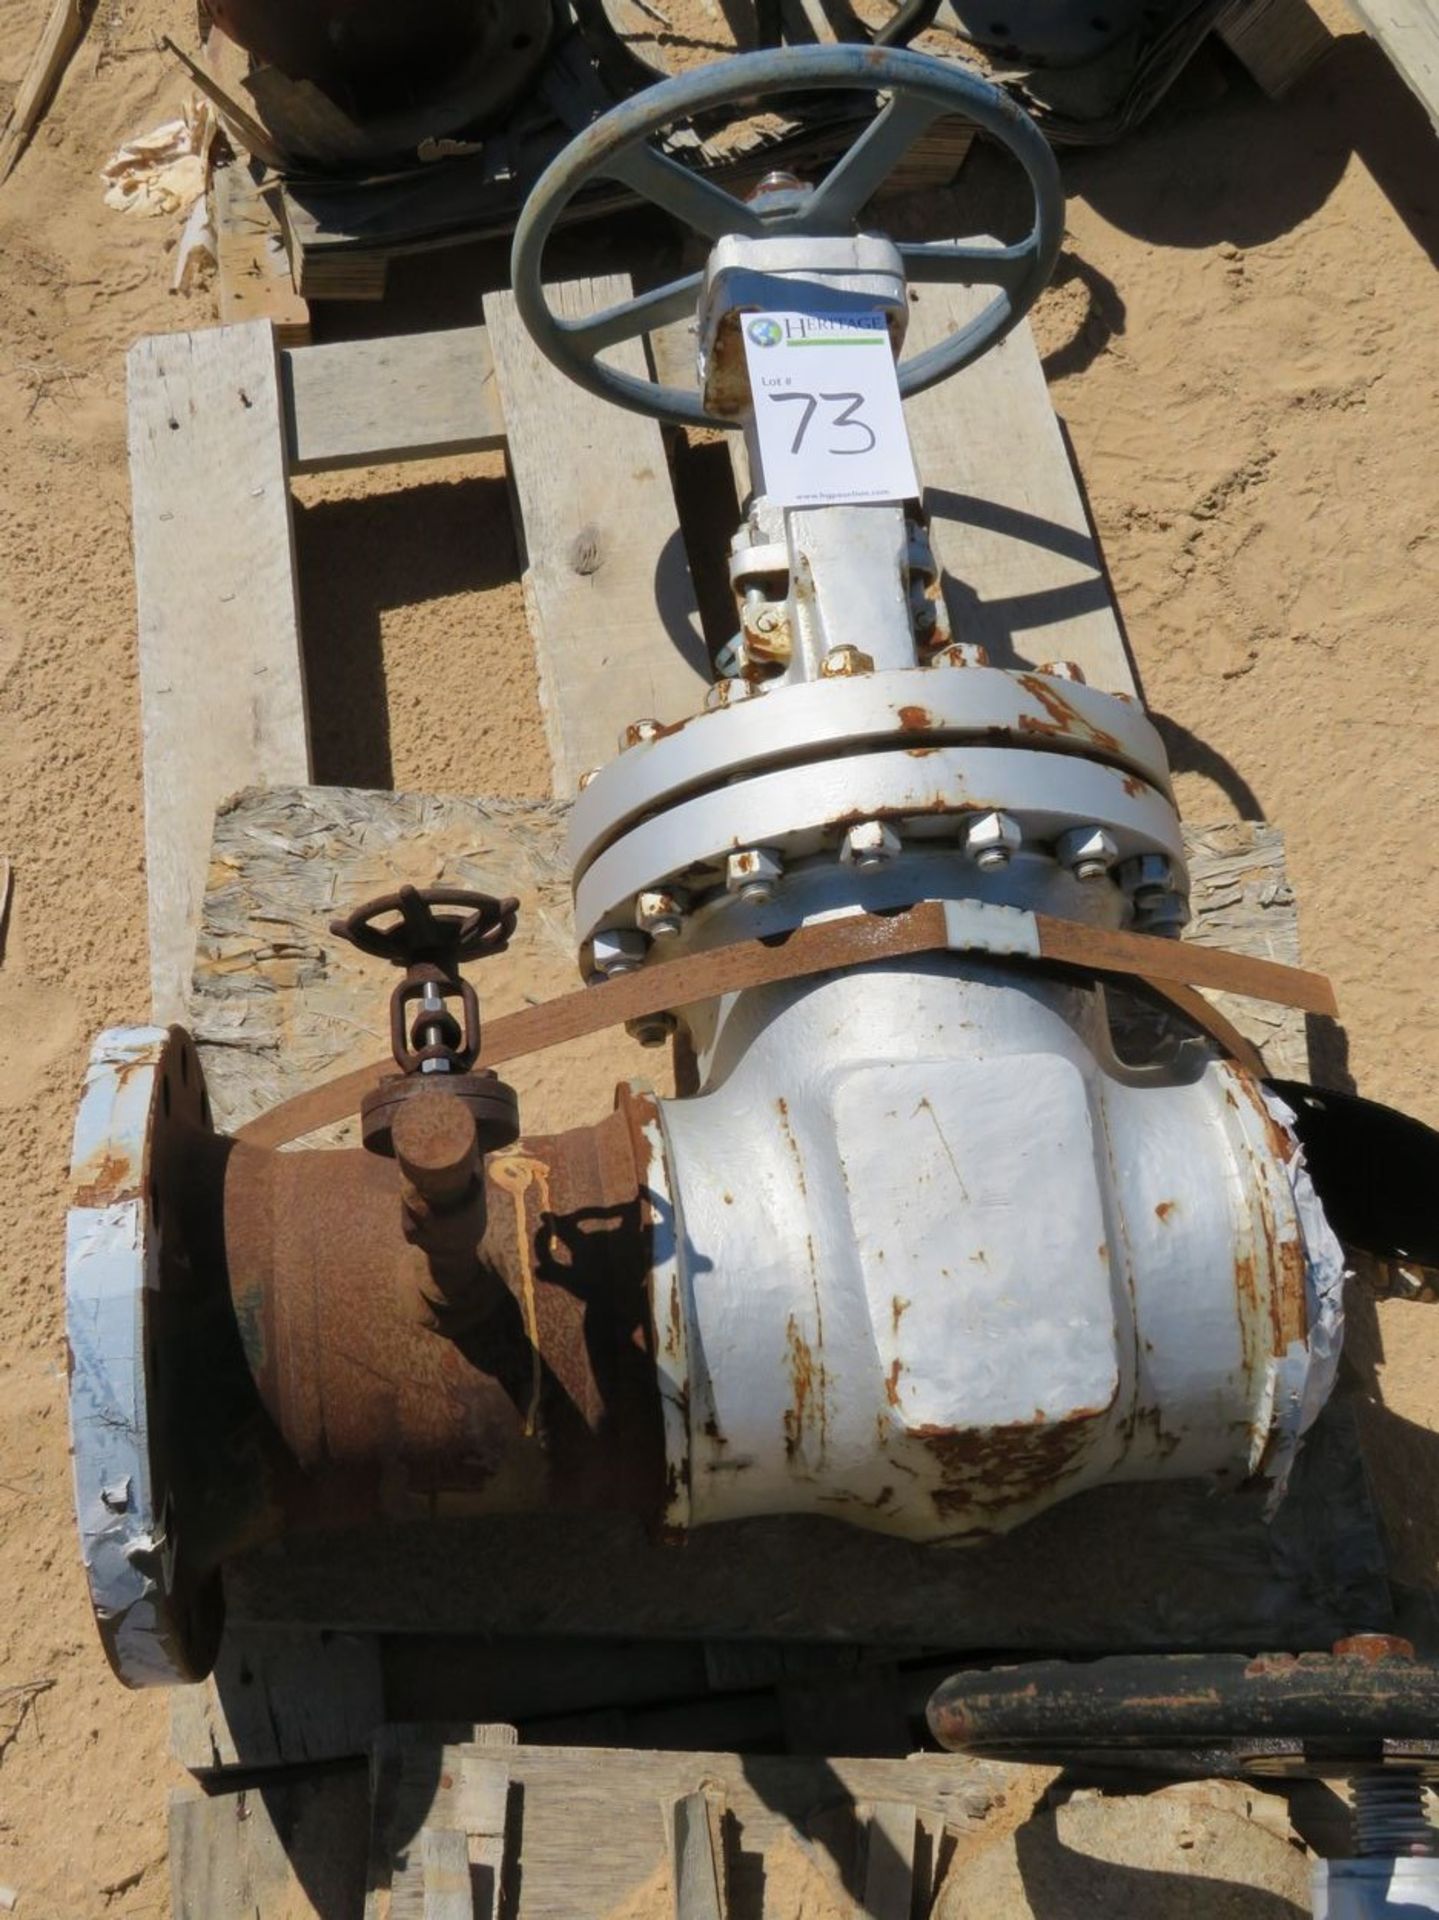 Powell 8"Gate Valve. Alpha West. Asset Located at 42134 Harper Lake Road, Hinkley, CA 92347.